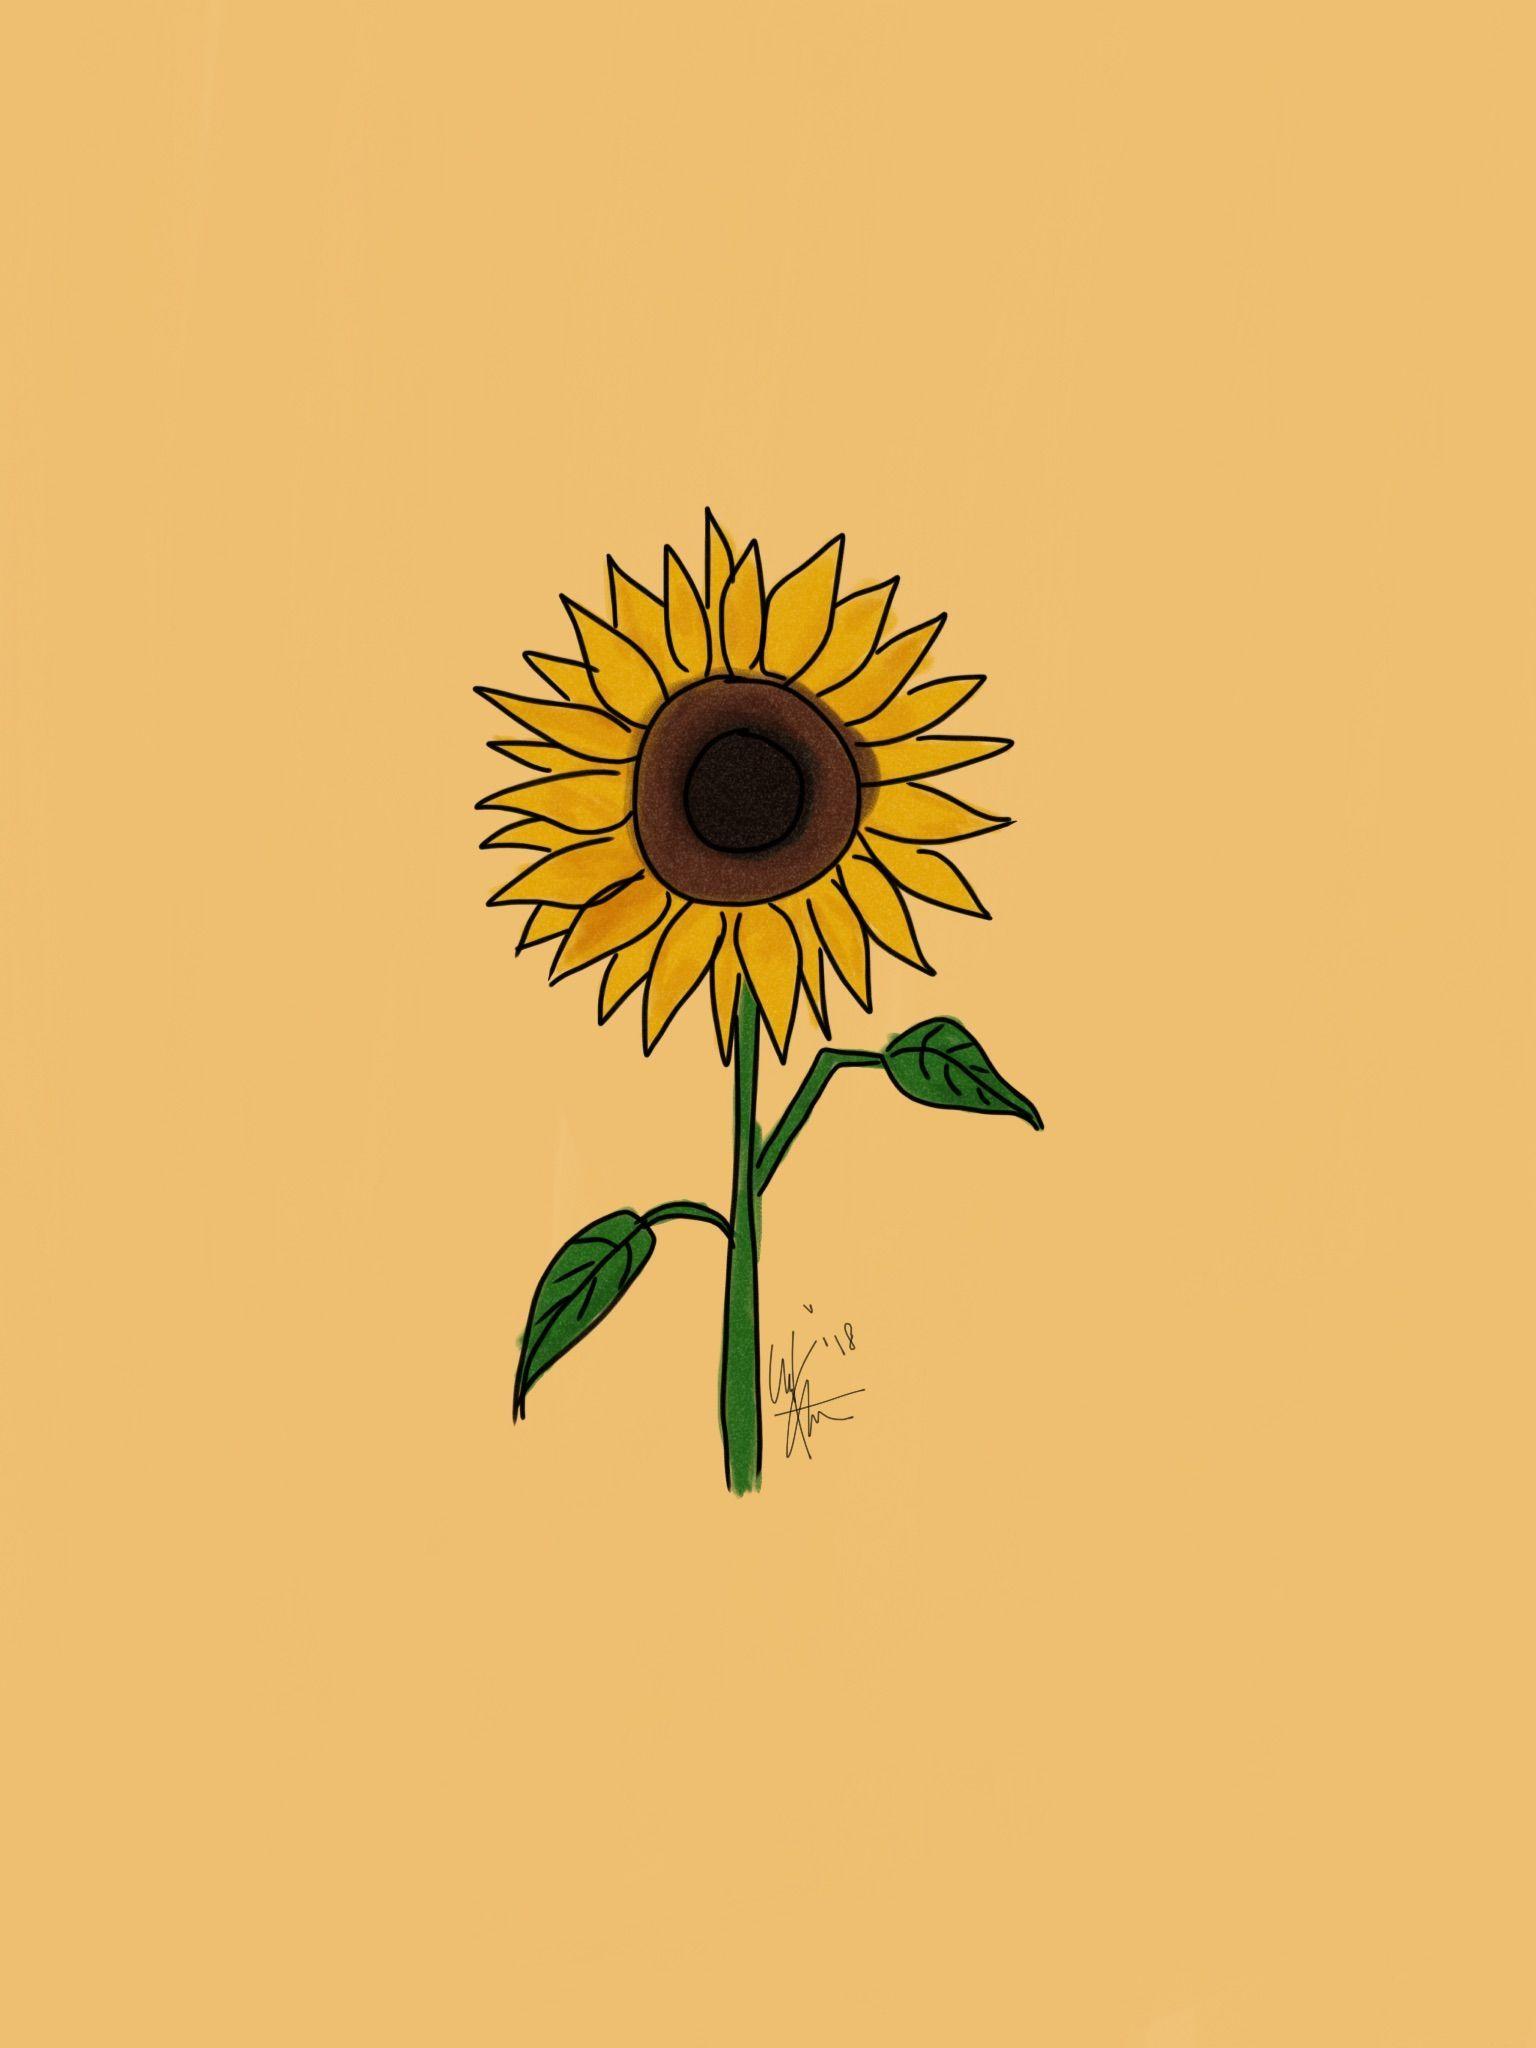 Sunflower Drawing Wallpapers Top Free Sunflower Drawing Backgrounds Wallpaperaccess